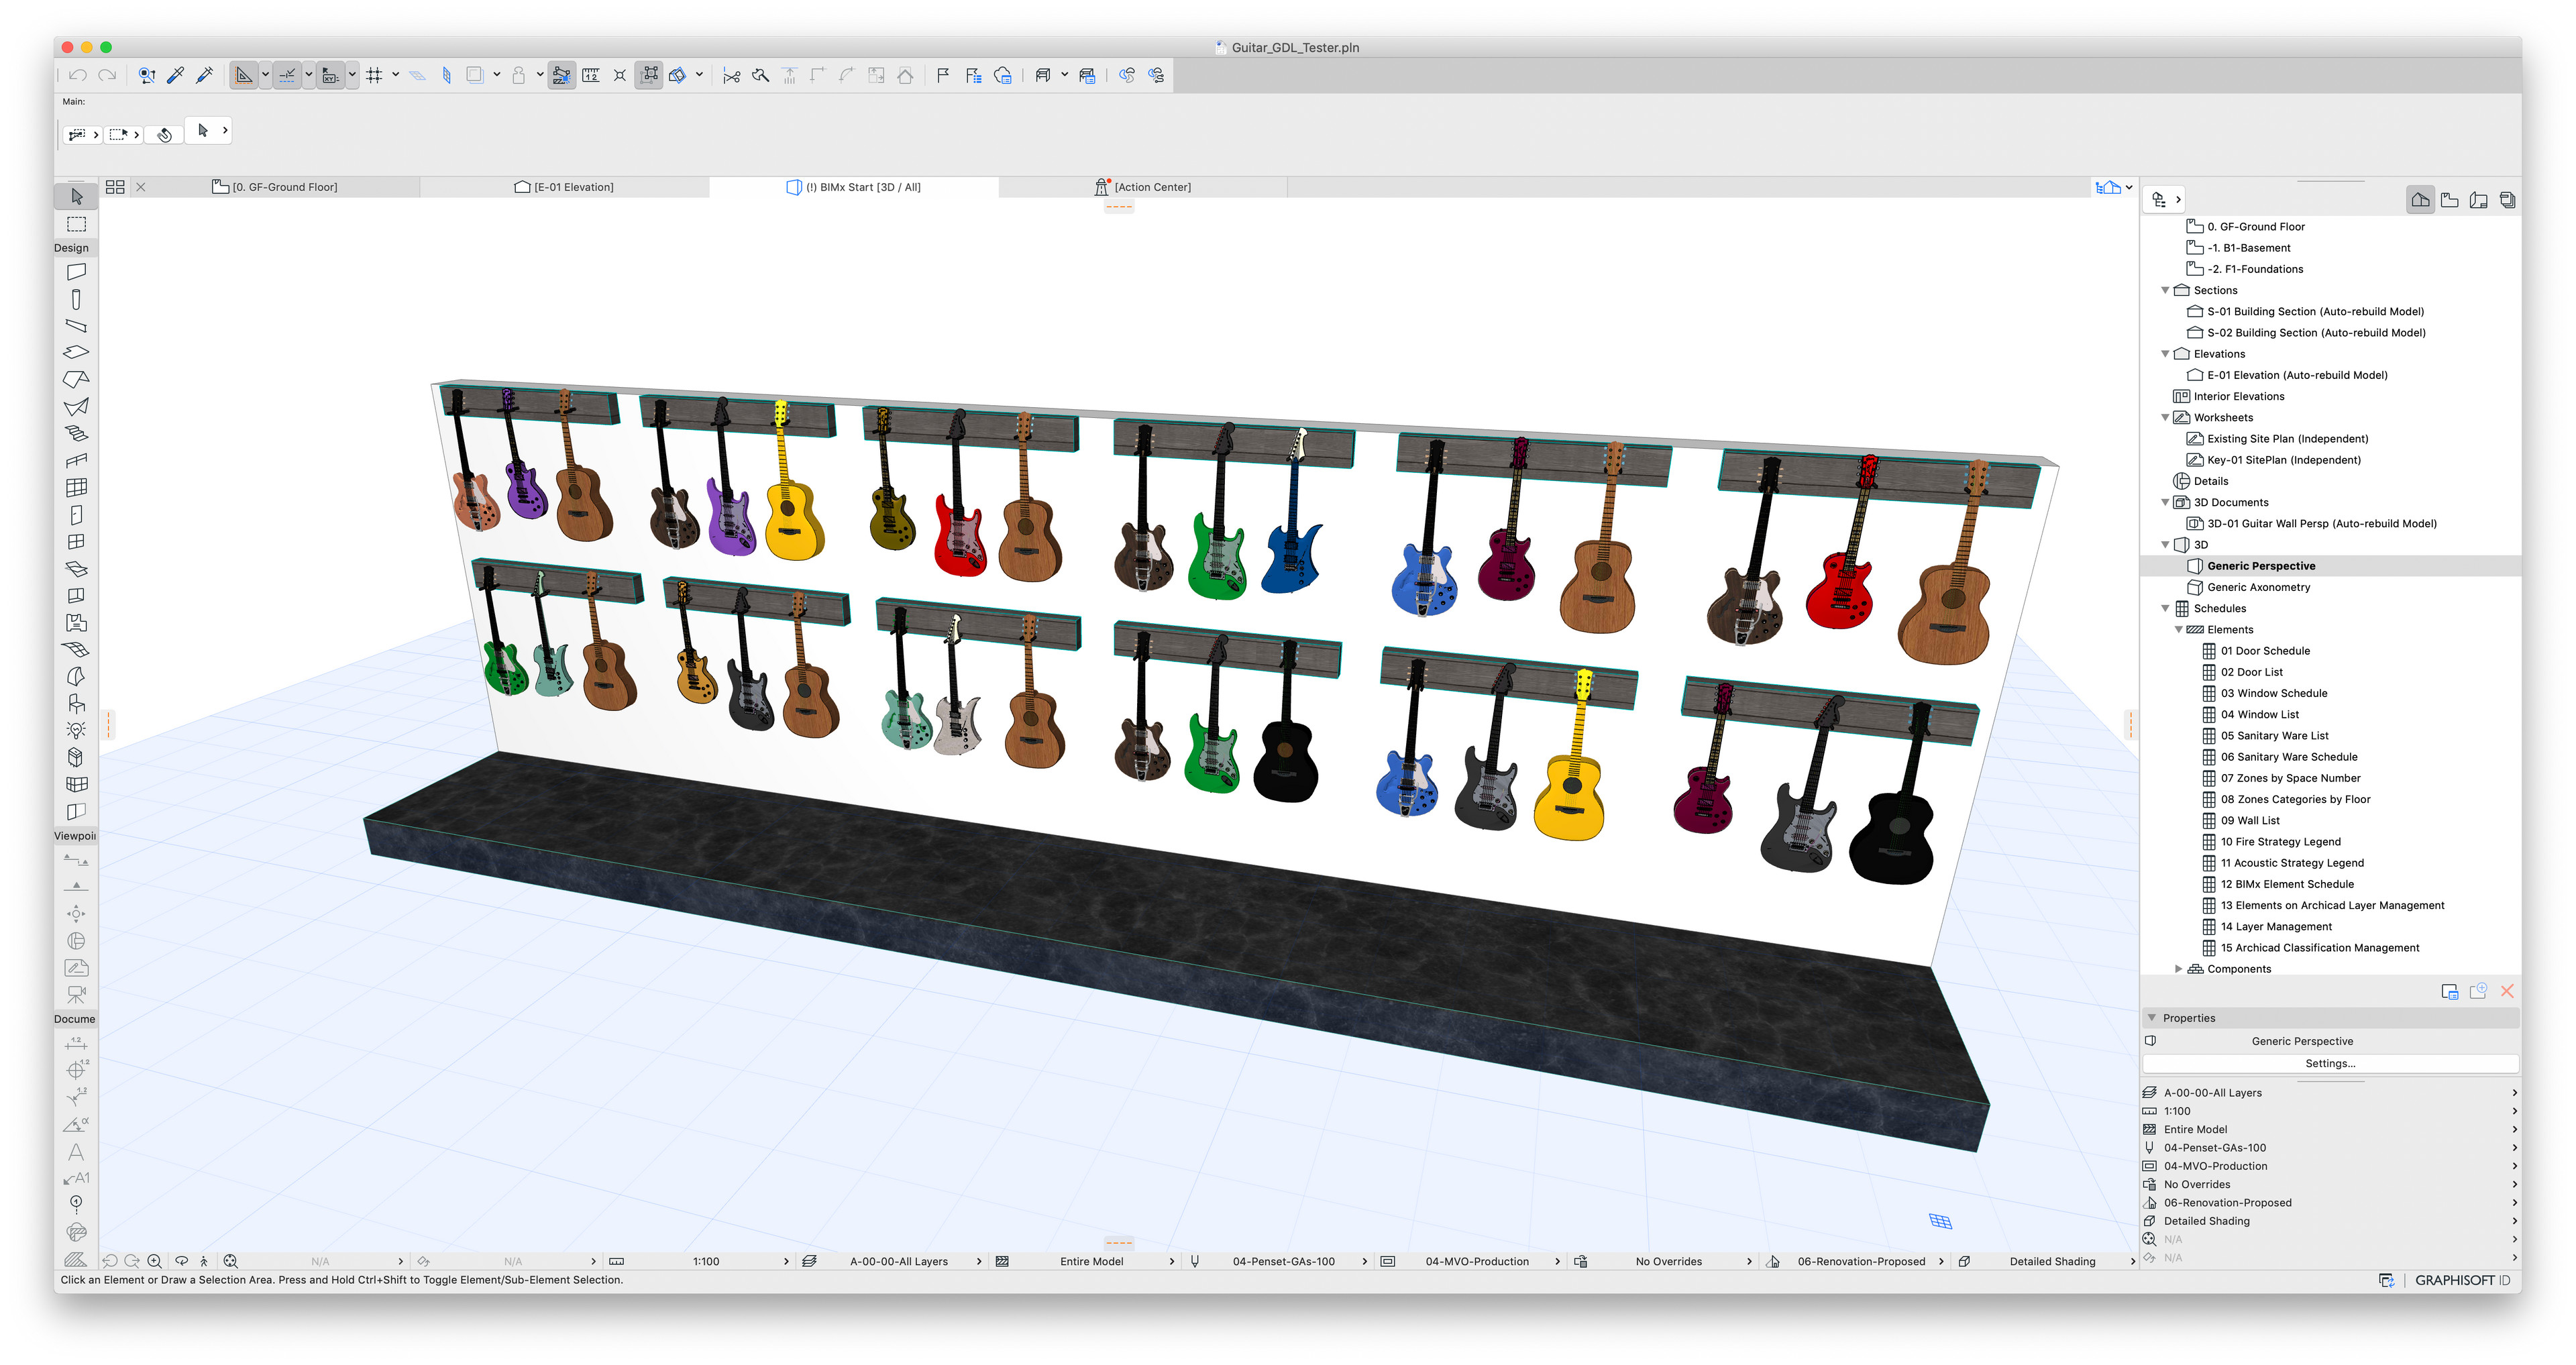 Here is the in ArchiCAD perspective view of a wall of these converted guitars hung.